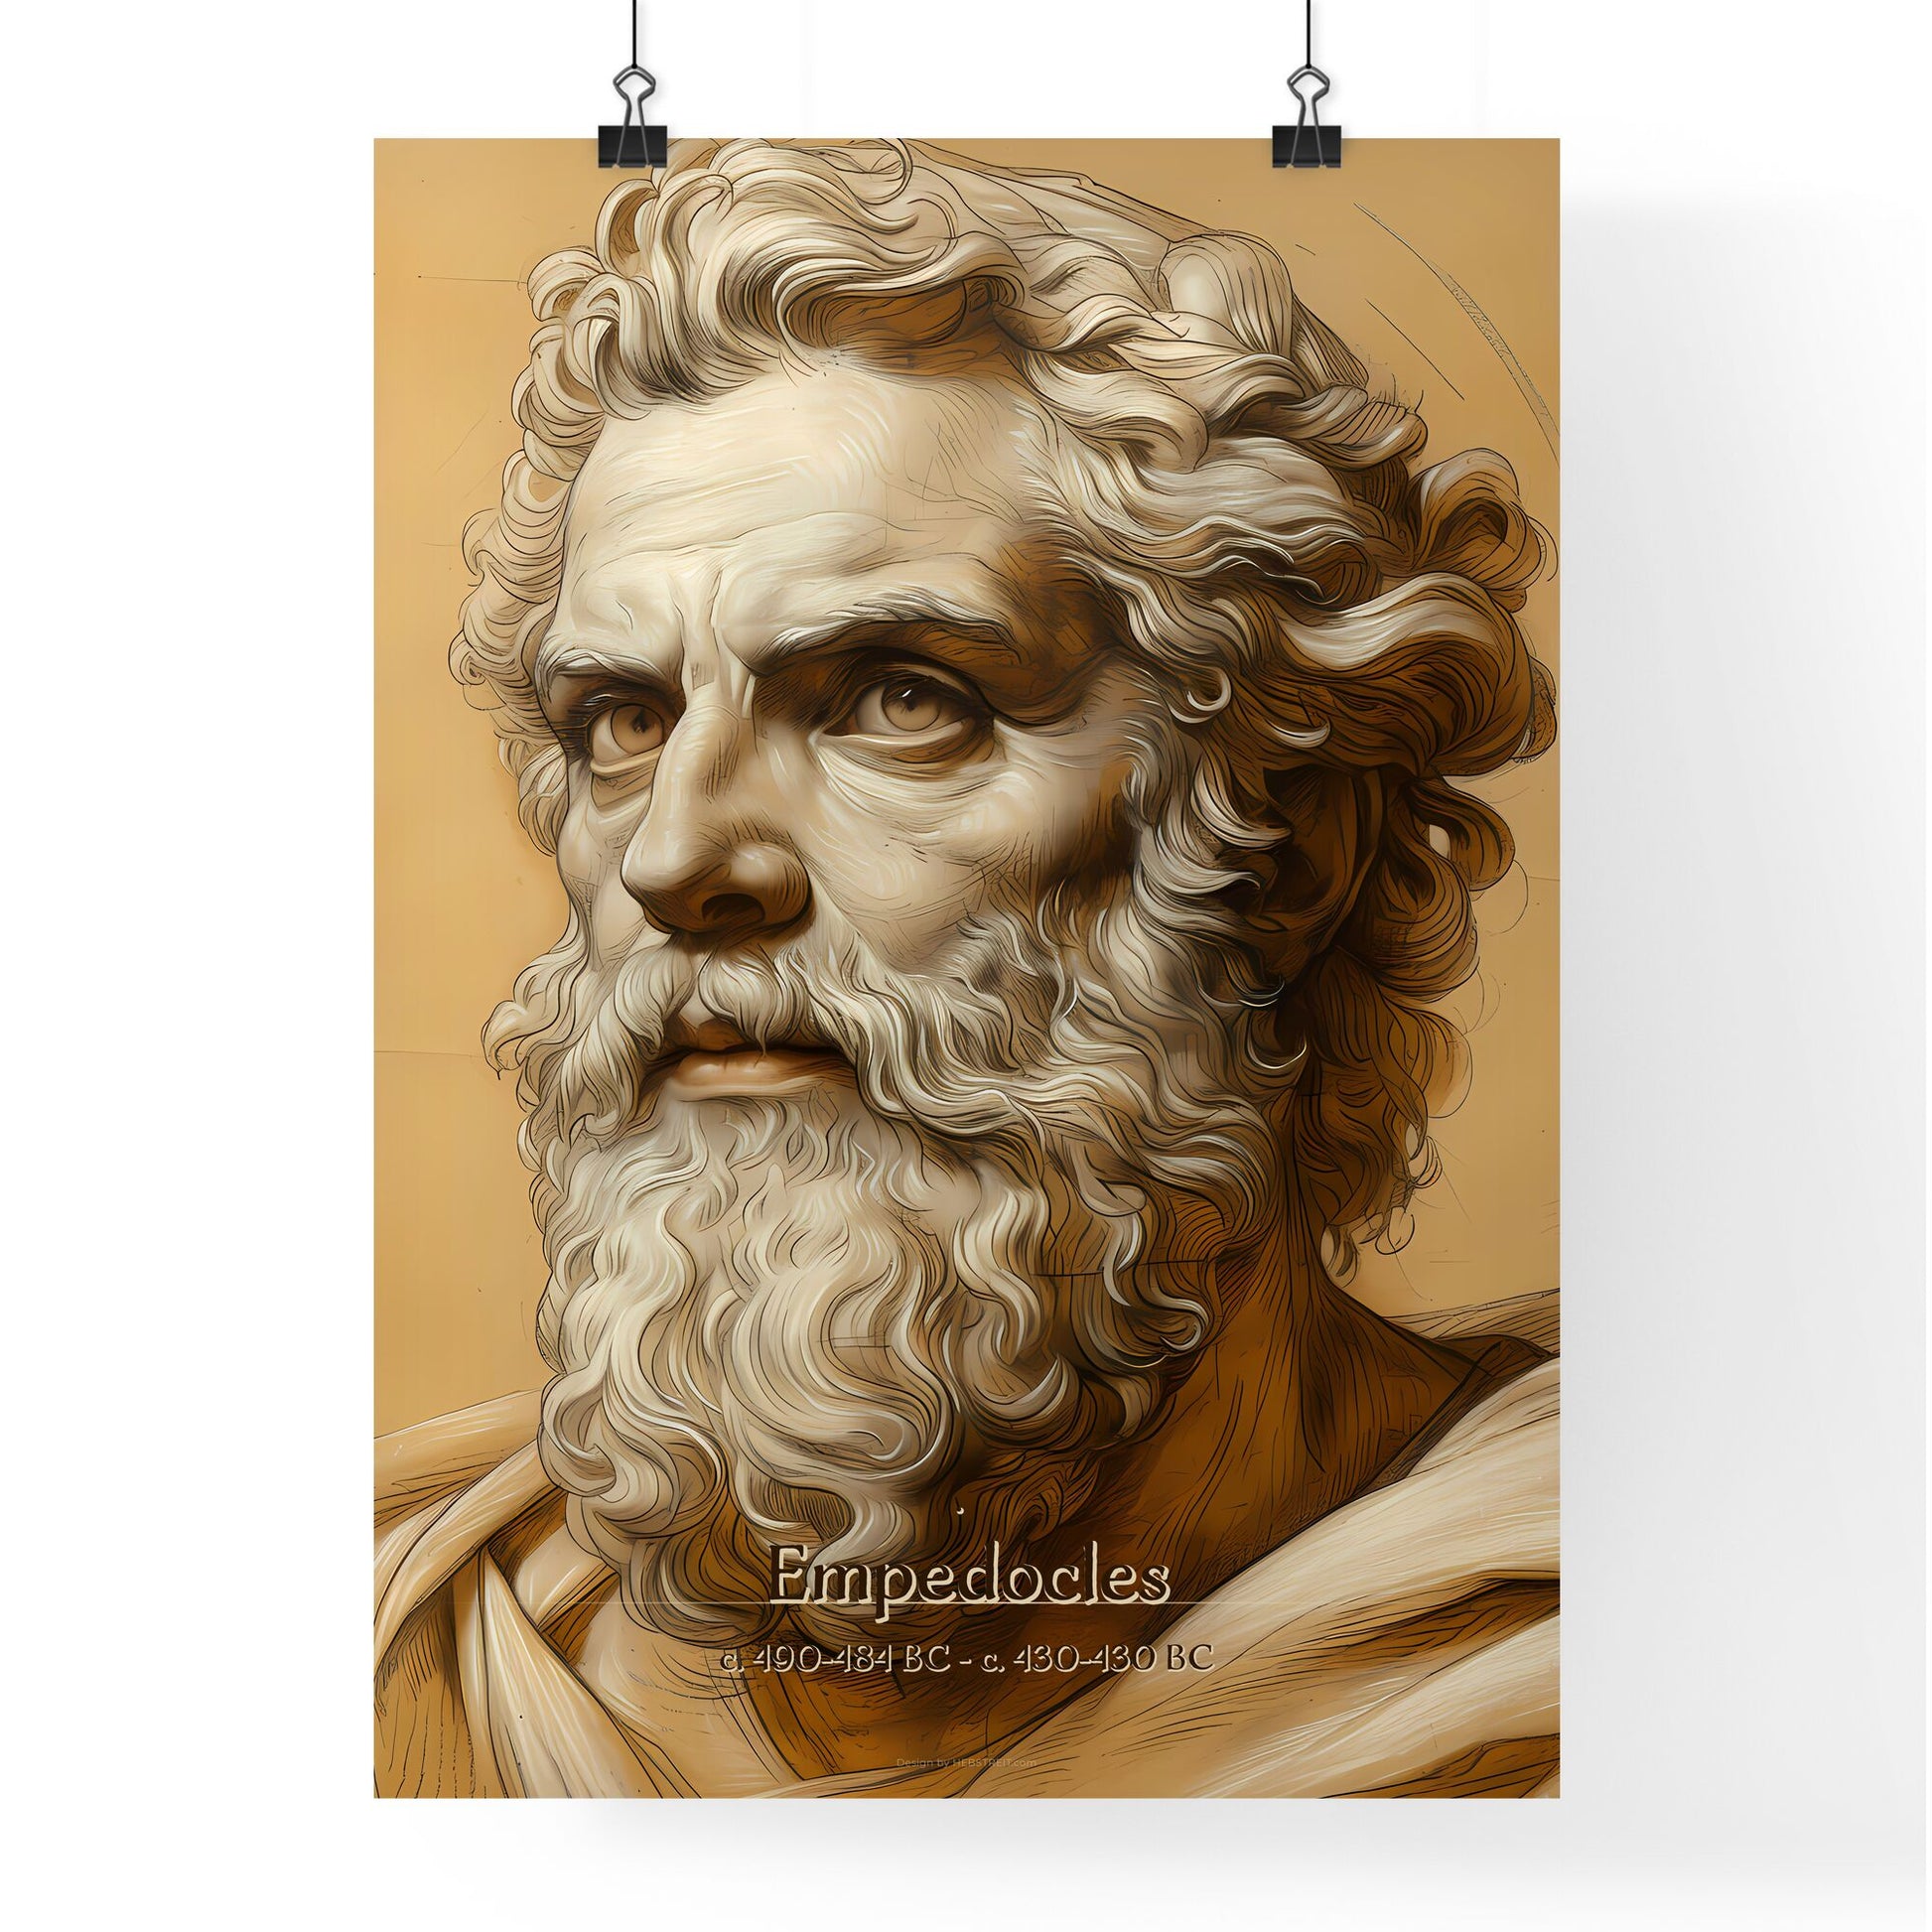 Empedocles, c. 490-484 BC - c. 430-430 BC, A Poster of a drawing of a bearded man Default Title